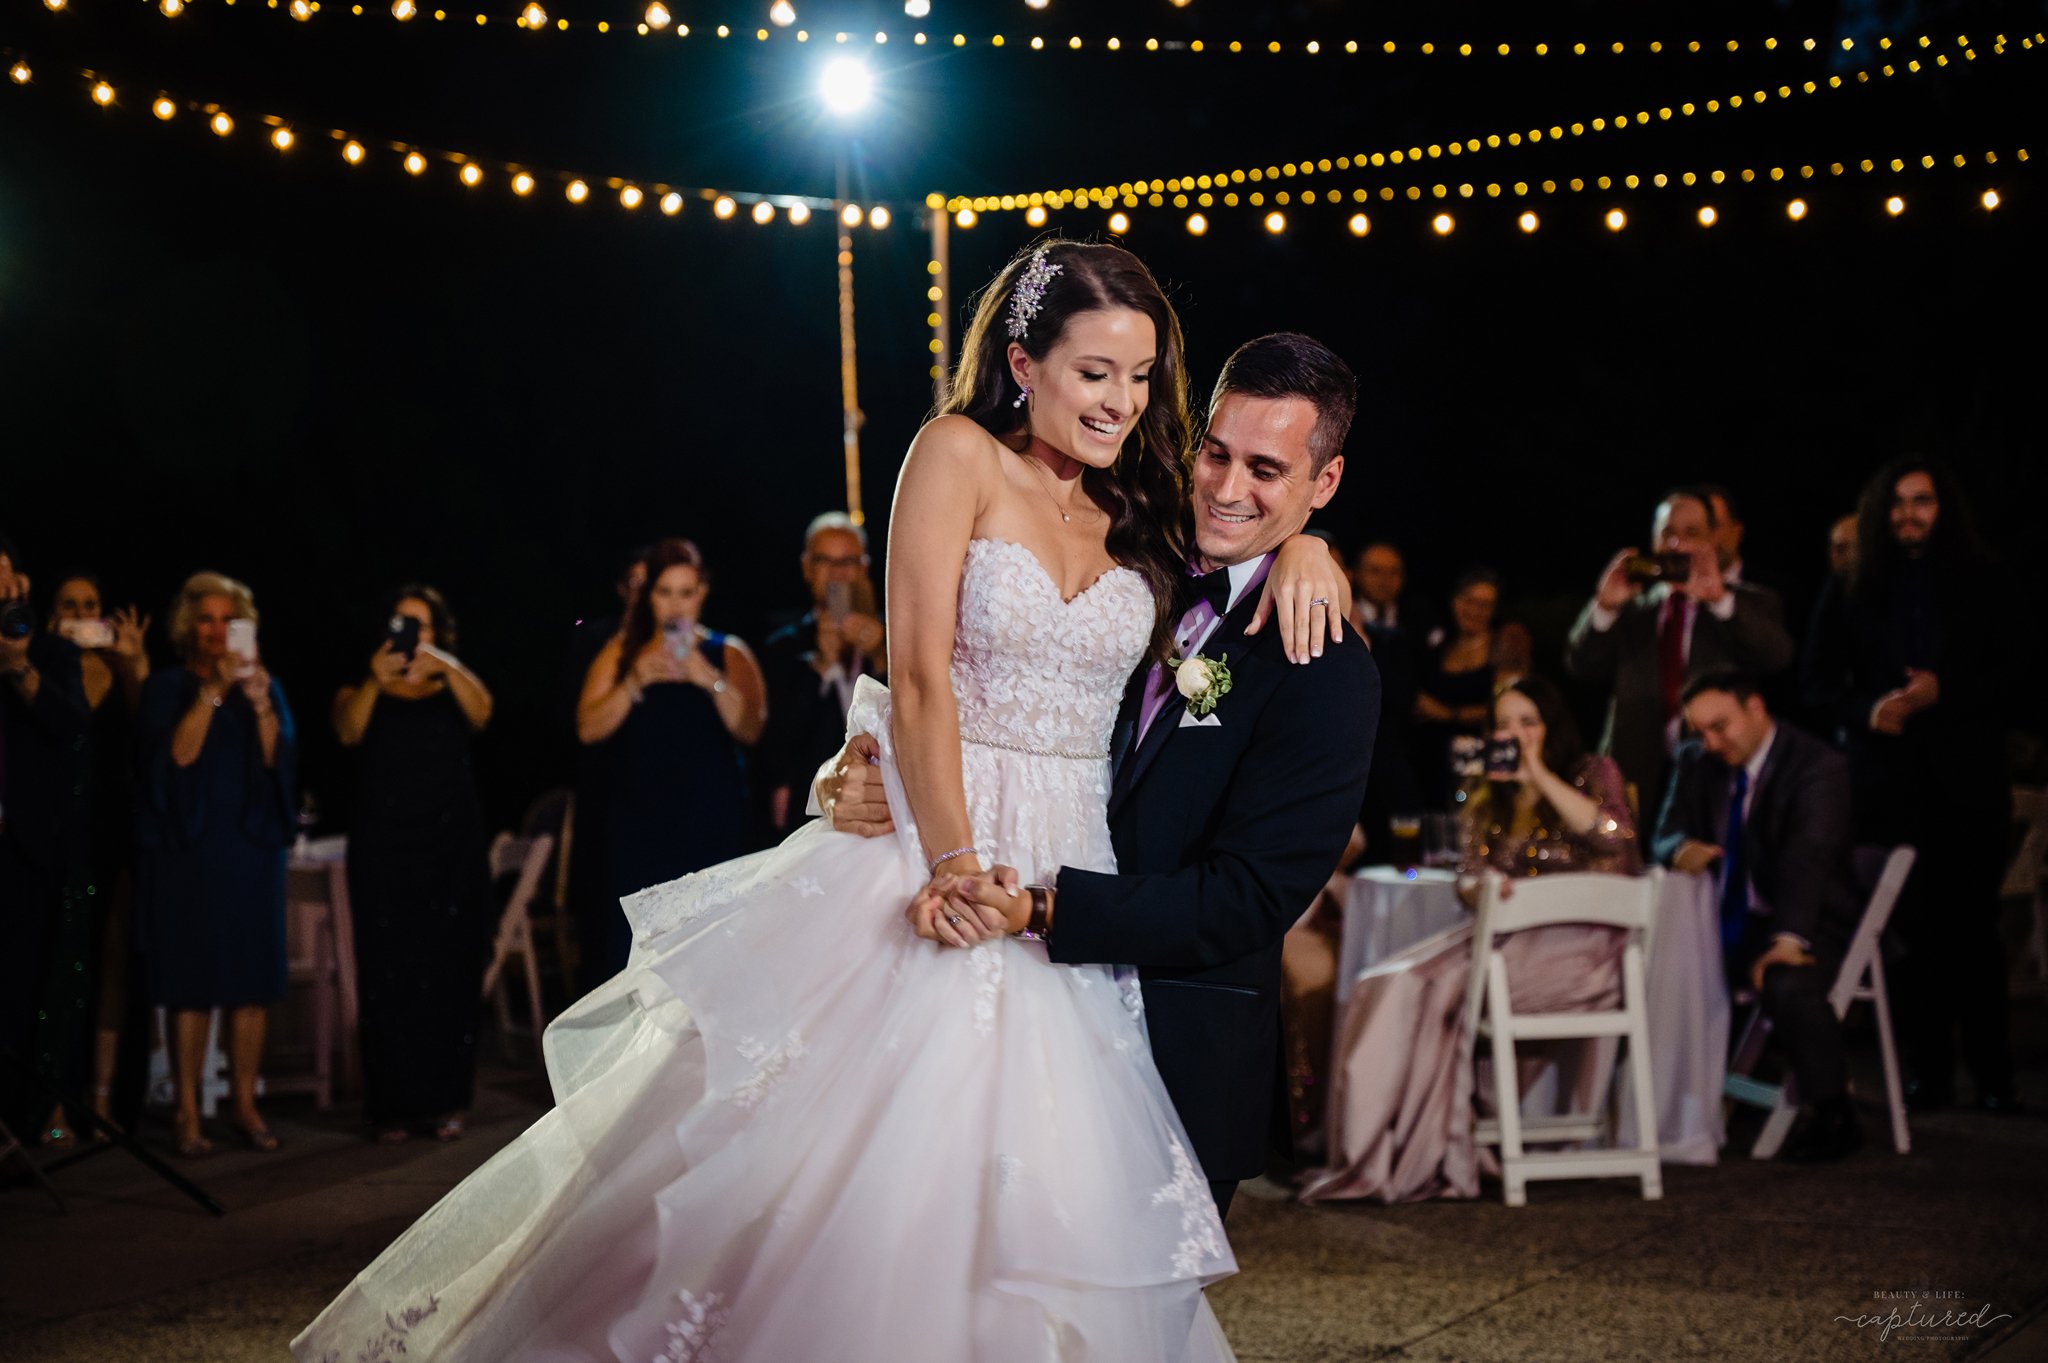 Beauty_and_Life_Captured_Danielle_and_Javier_Wedding_test-151.jpg